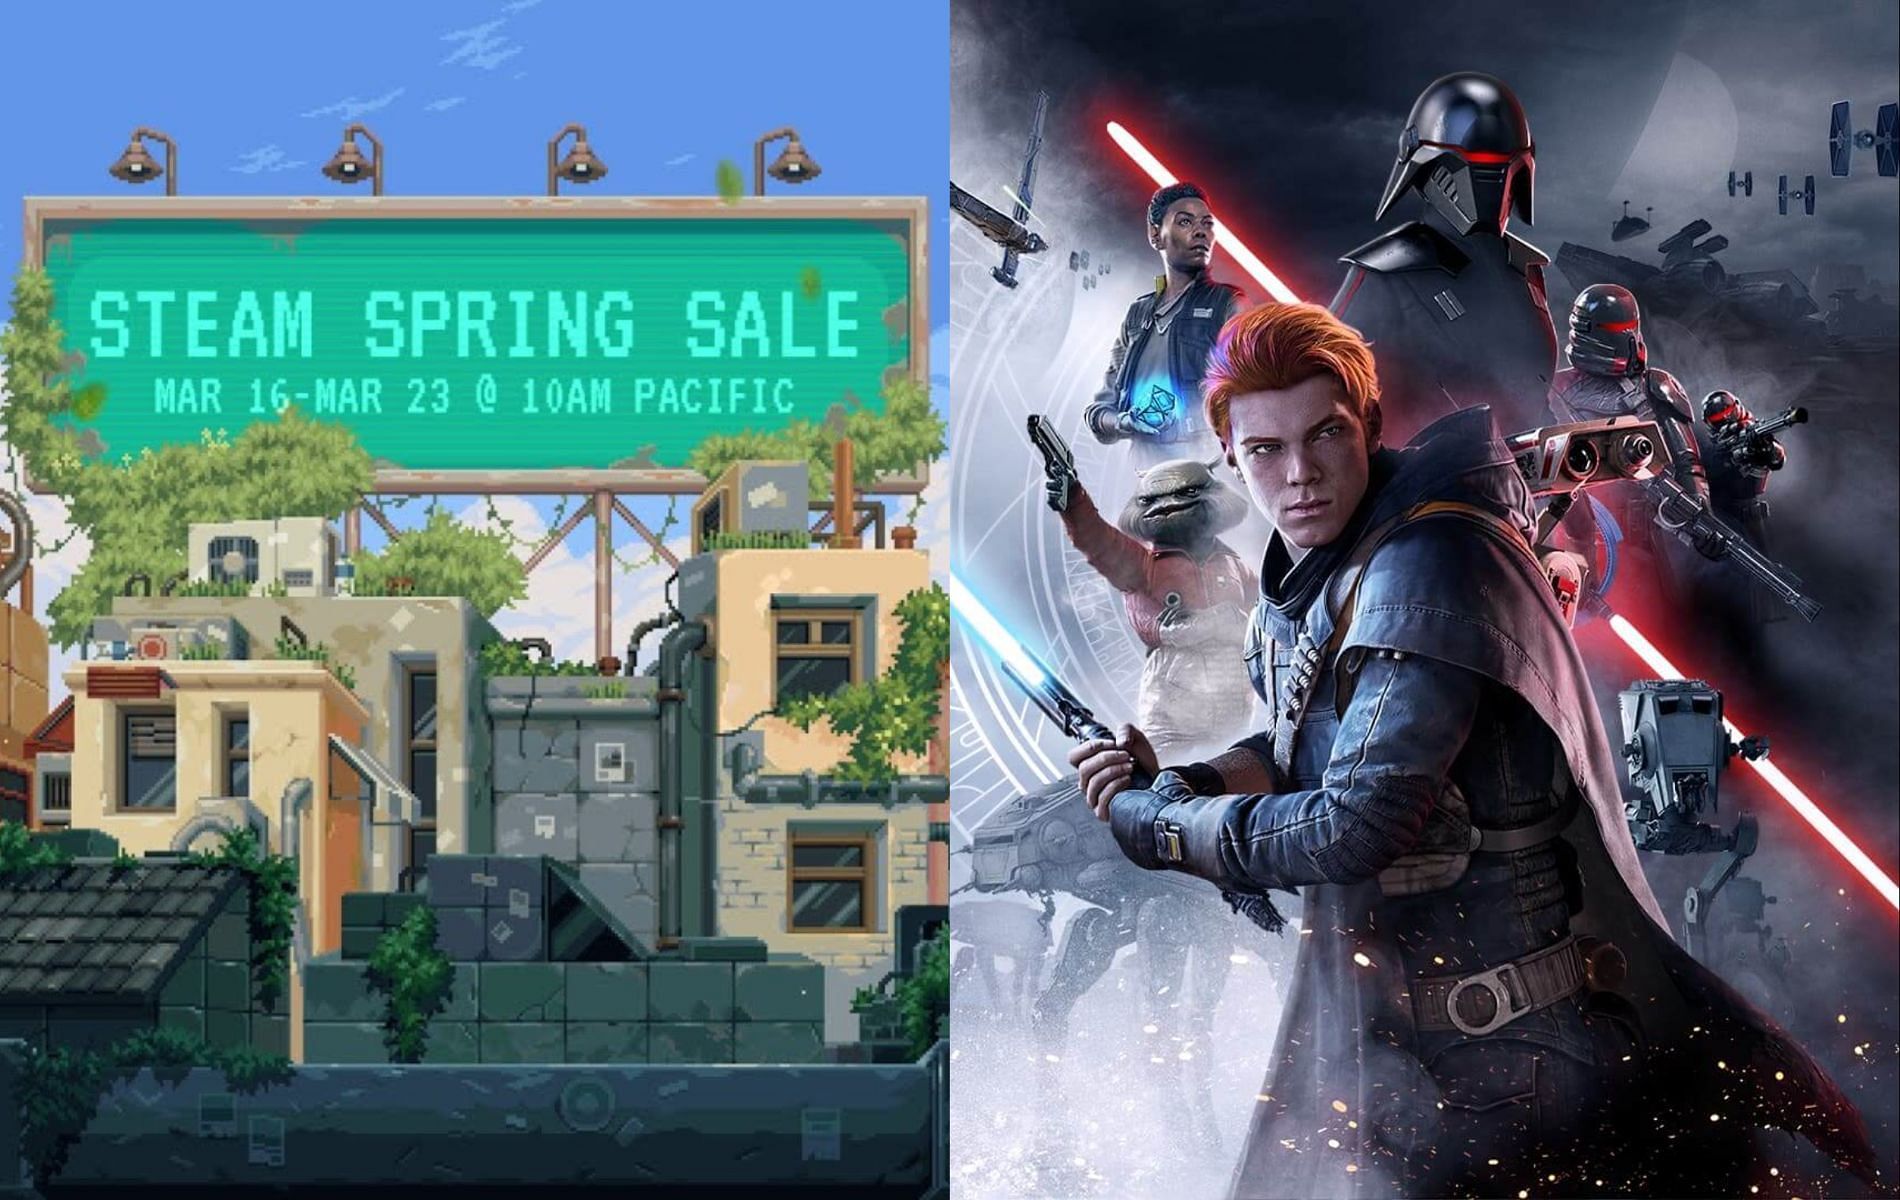 One of the best Star Wars games is free on Steam, but only for 48 hours